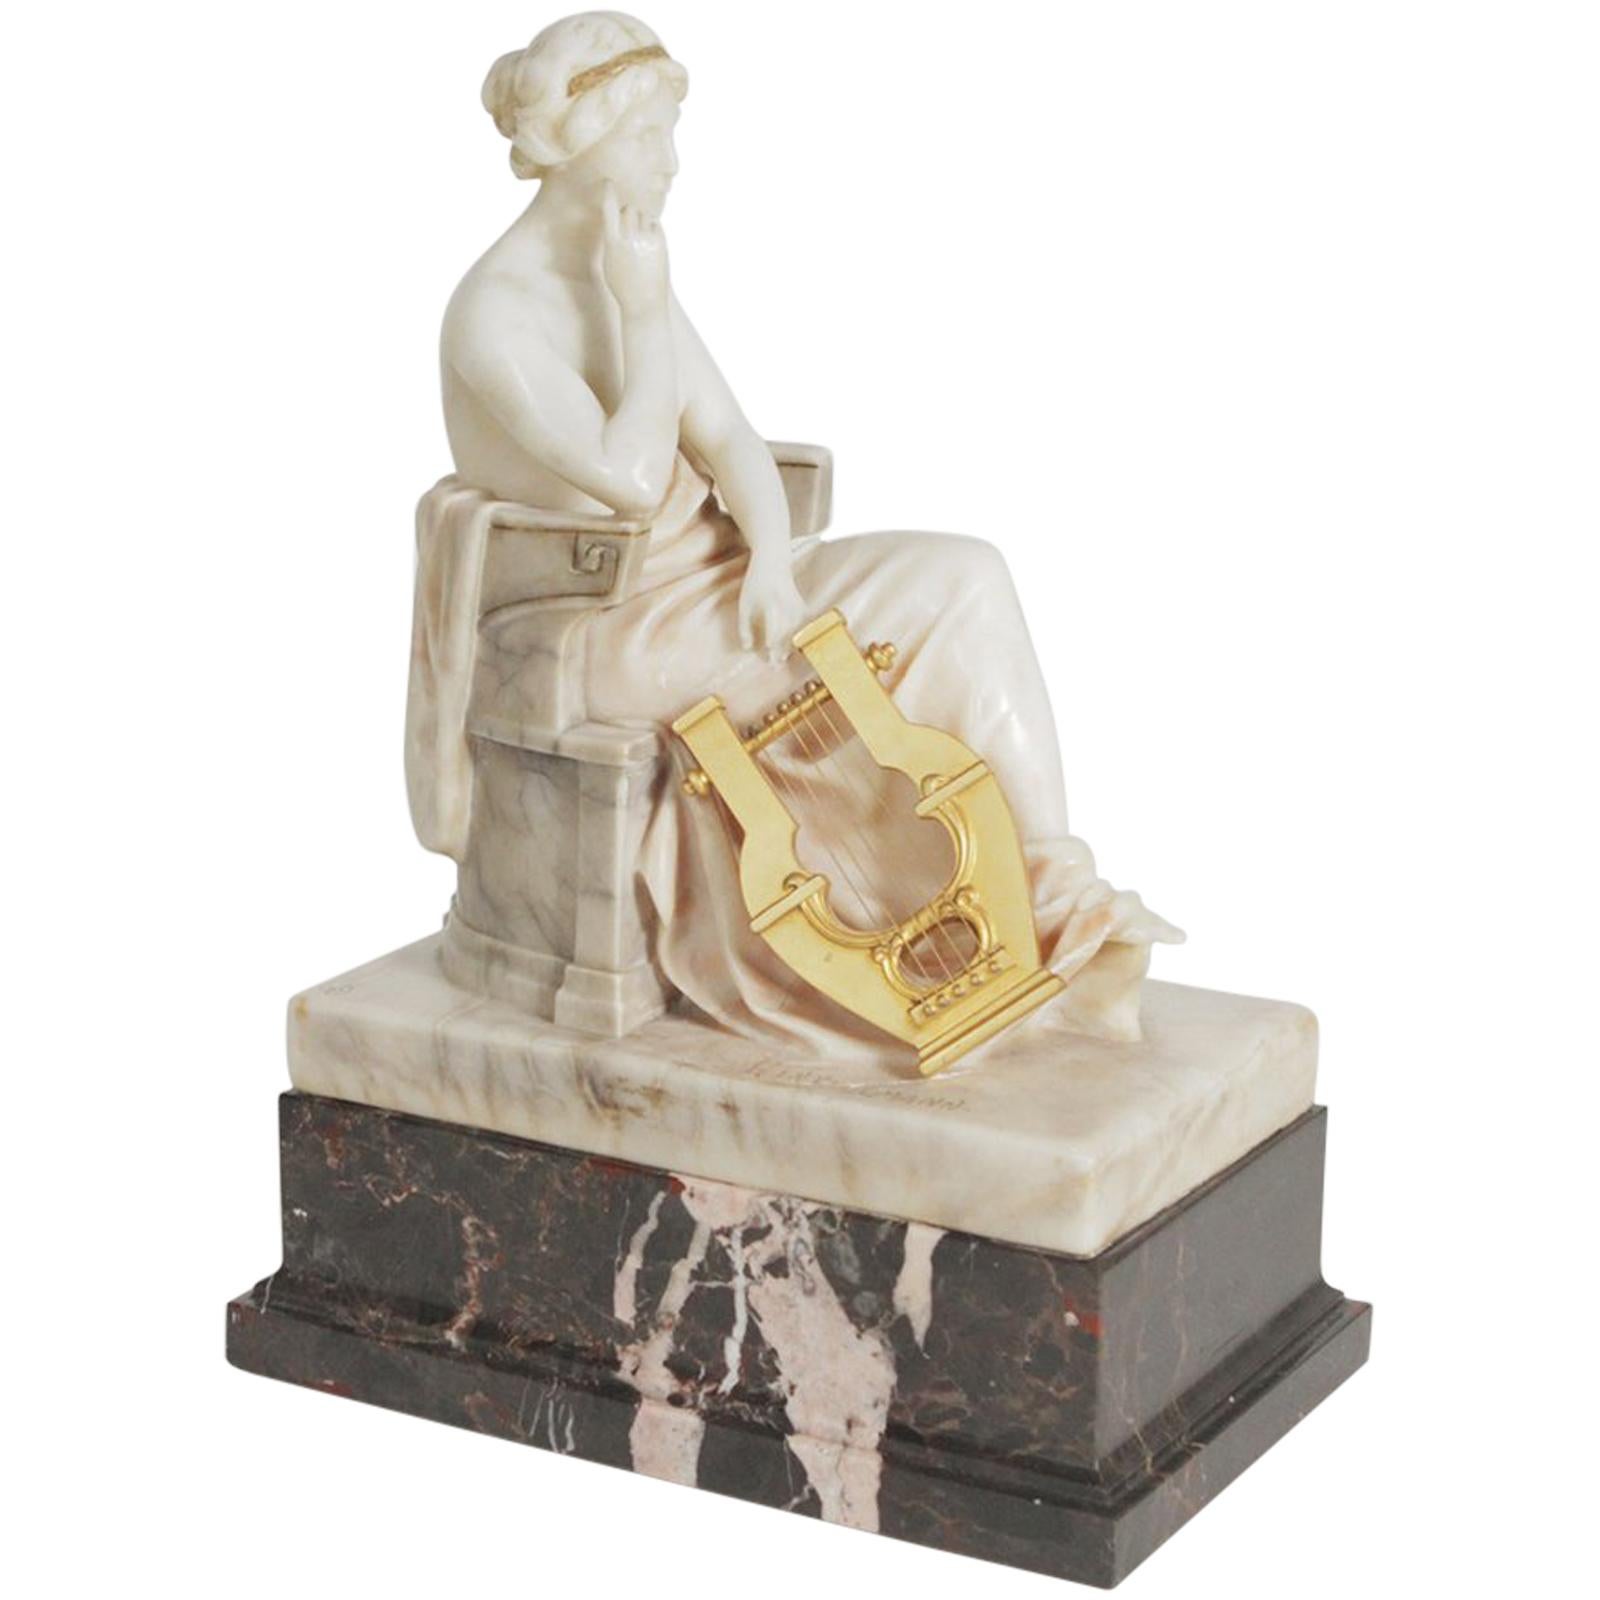 Neoclassical German Marble and Ormolu Sculpture of a Seated Muse with Harp